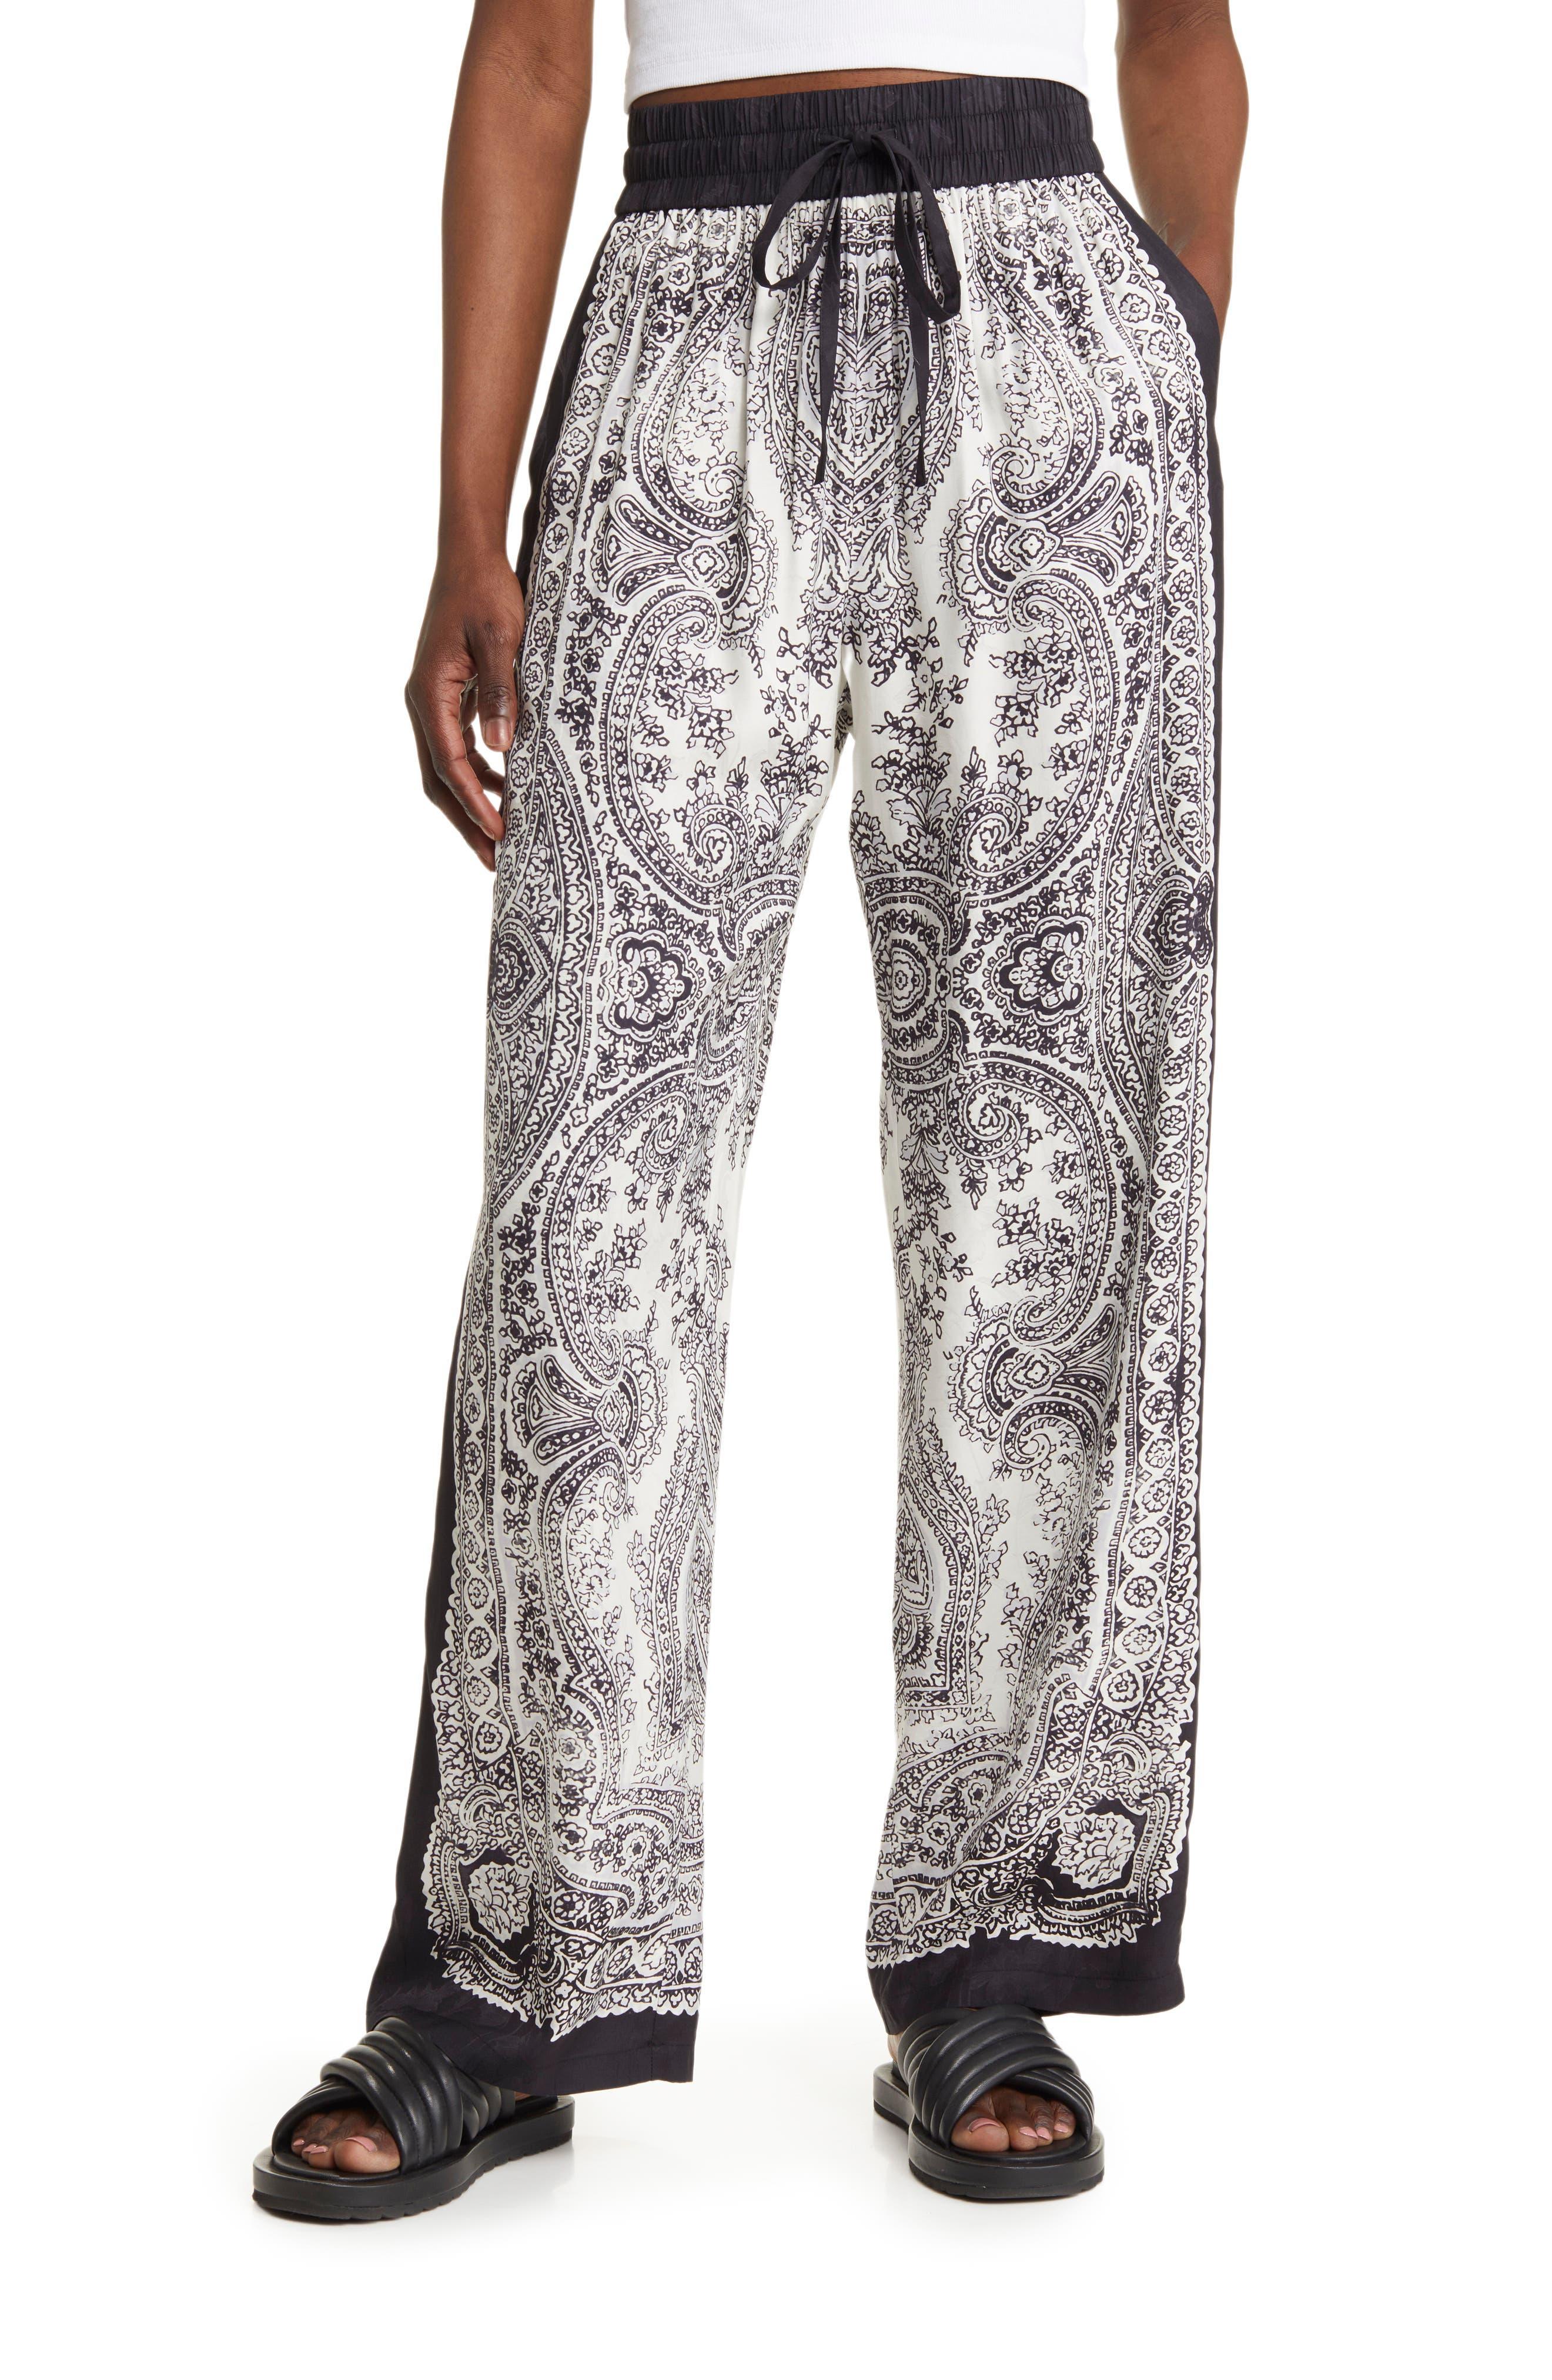 Black & White floral printed pants set - Style 379 – CAN